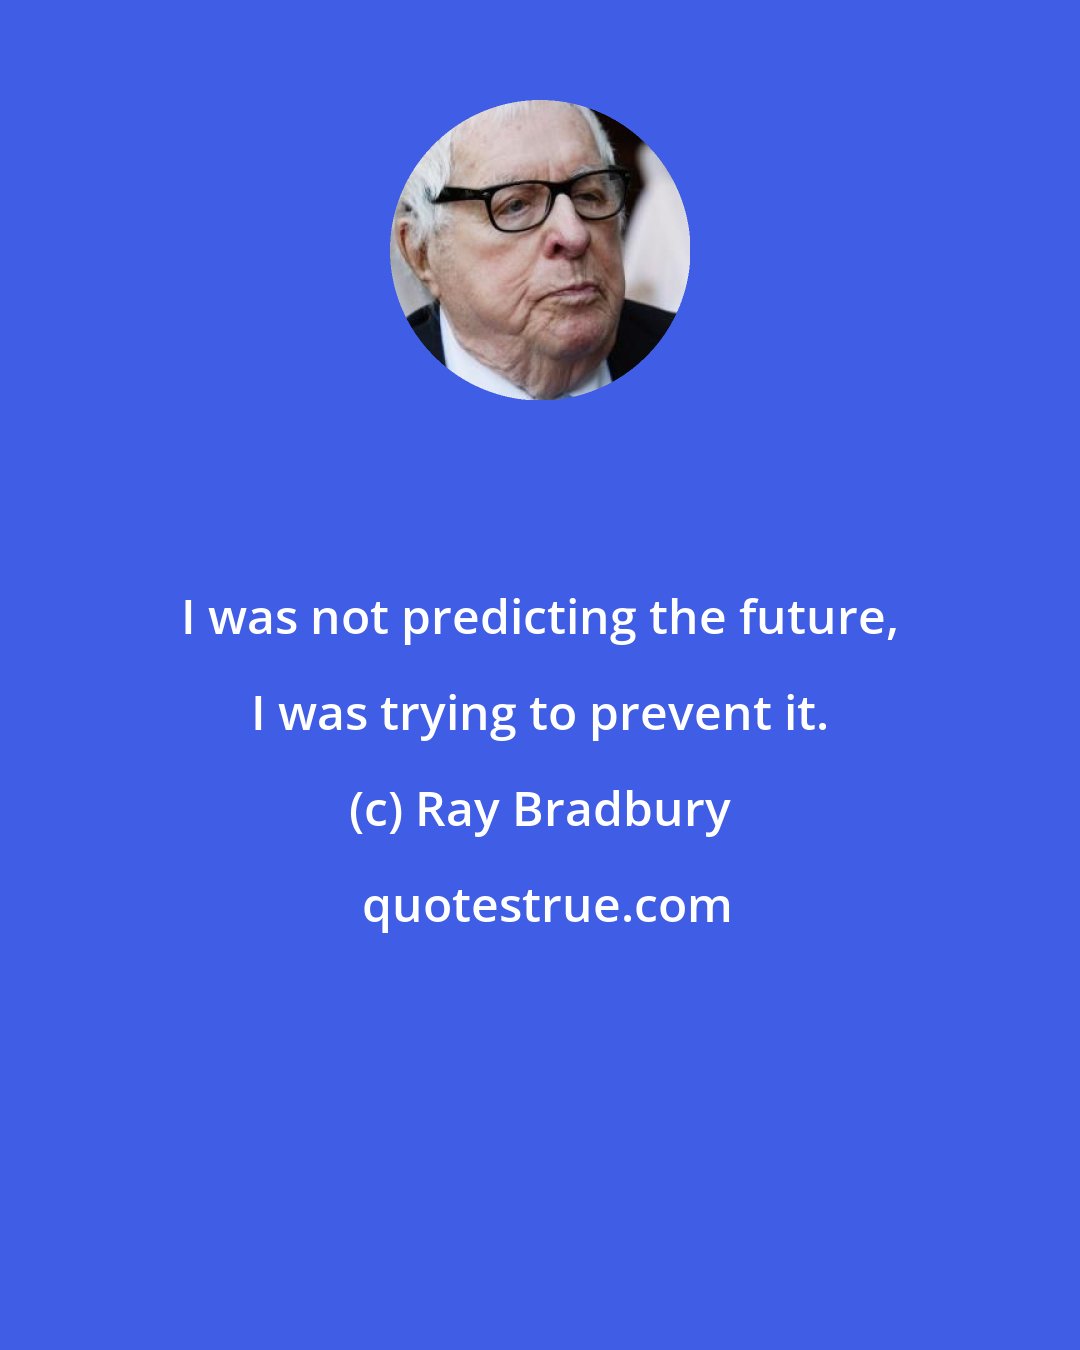 Ray Bradbury: I was not predicting the future, I was trying to prevent it.